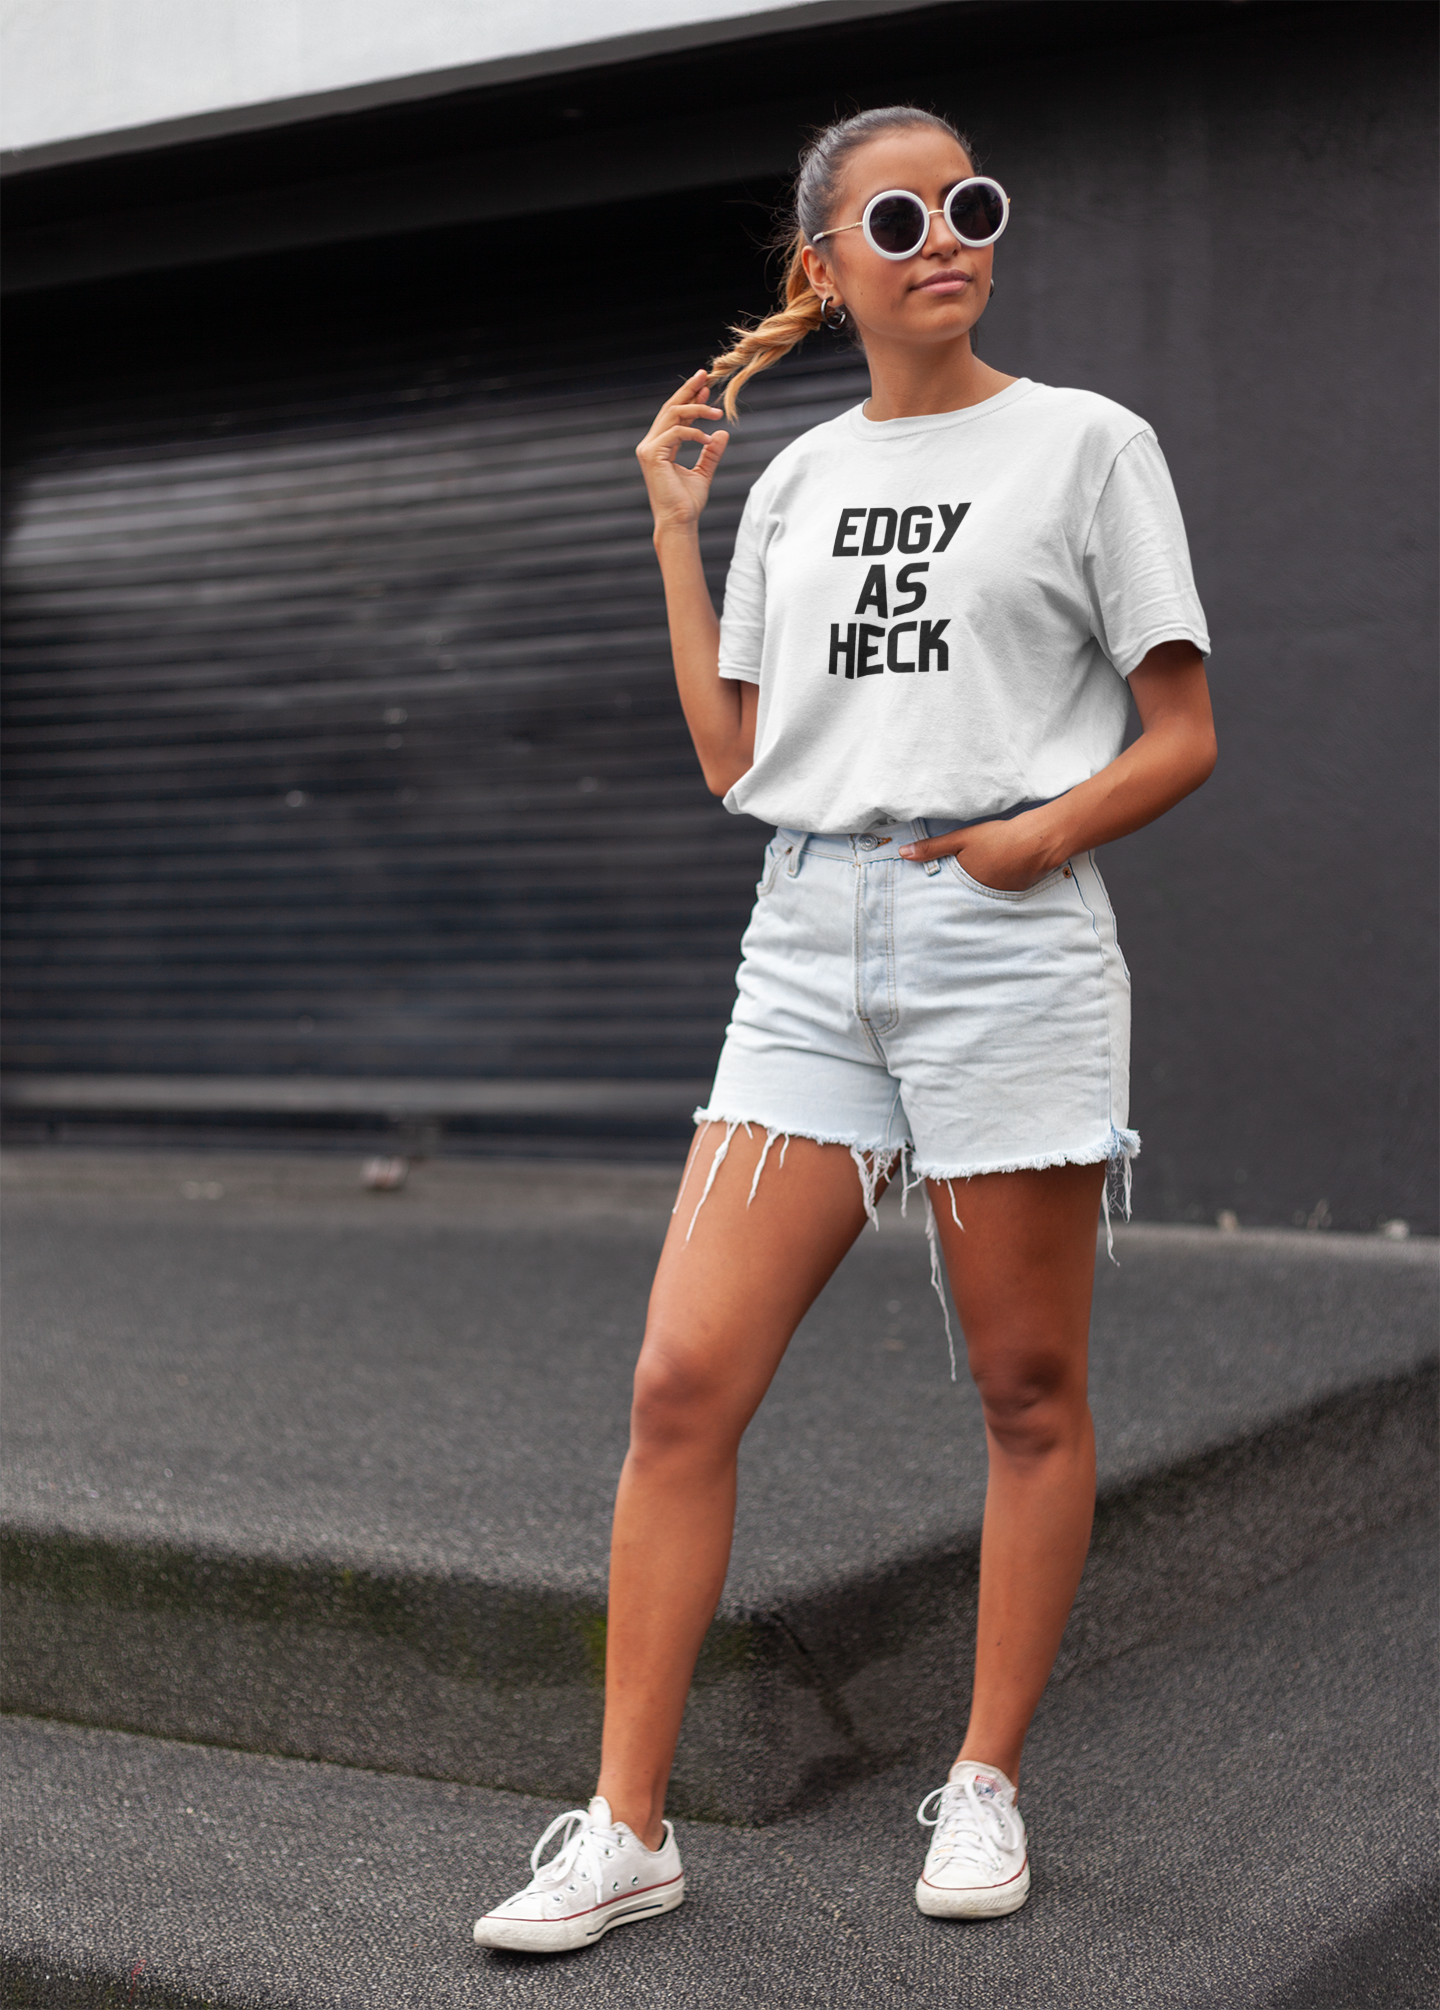 Women's Edgy As Heck White T-Shirt